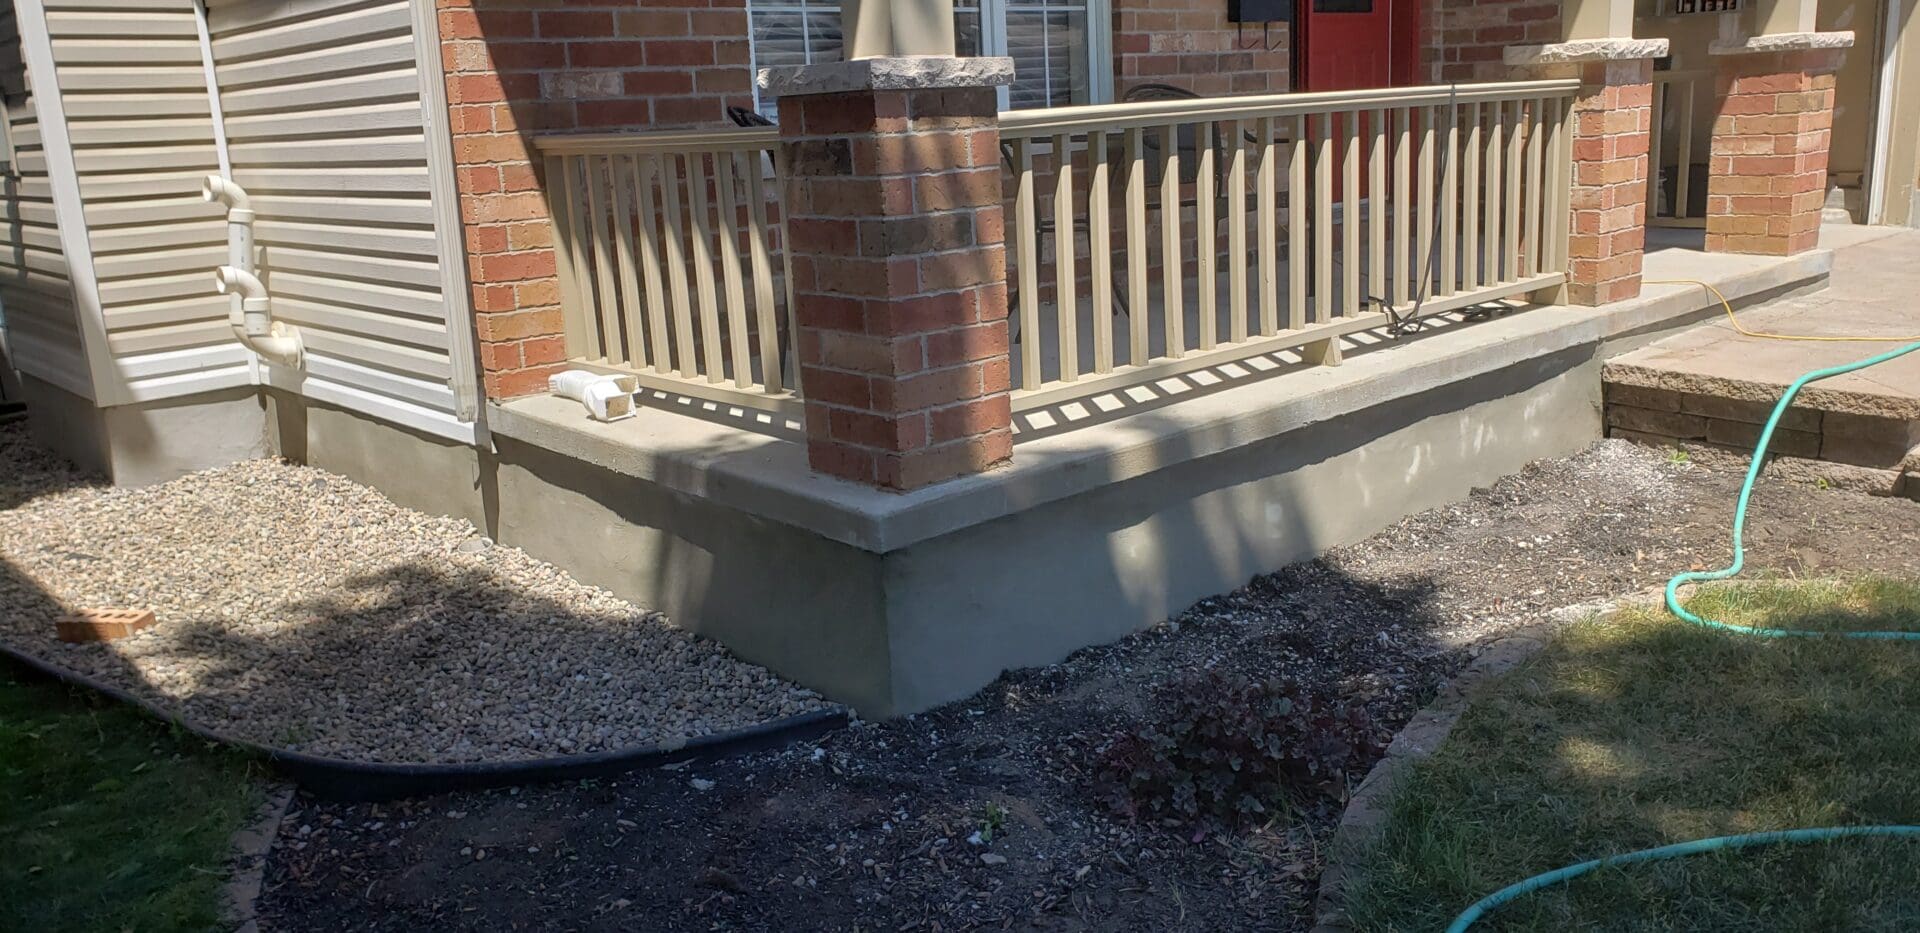 Freshly resurfaced concrete on the foundation of a red bricked home